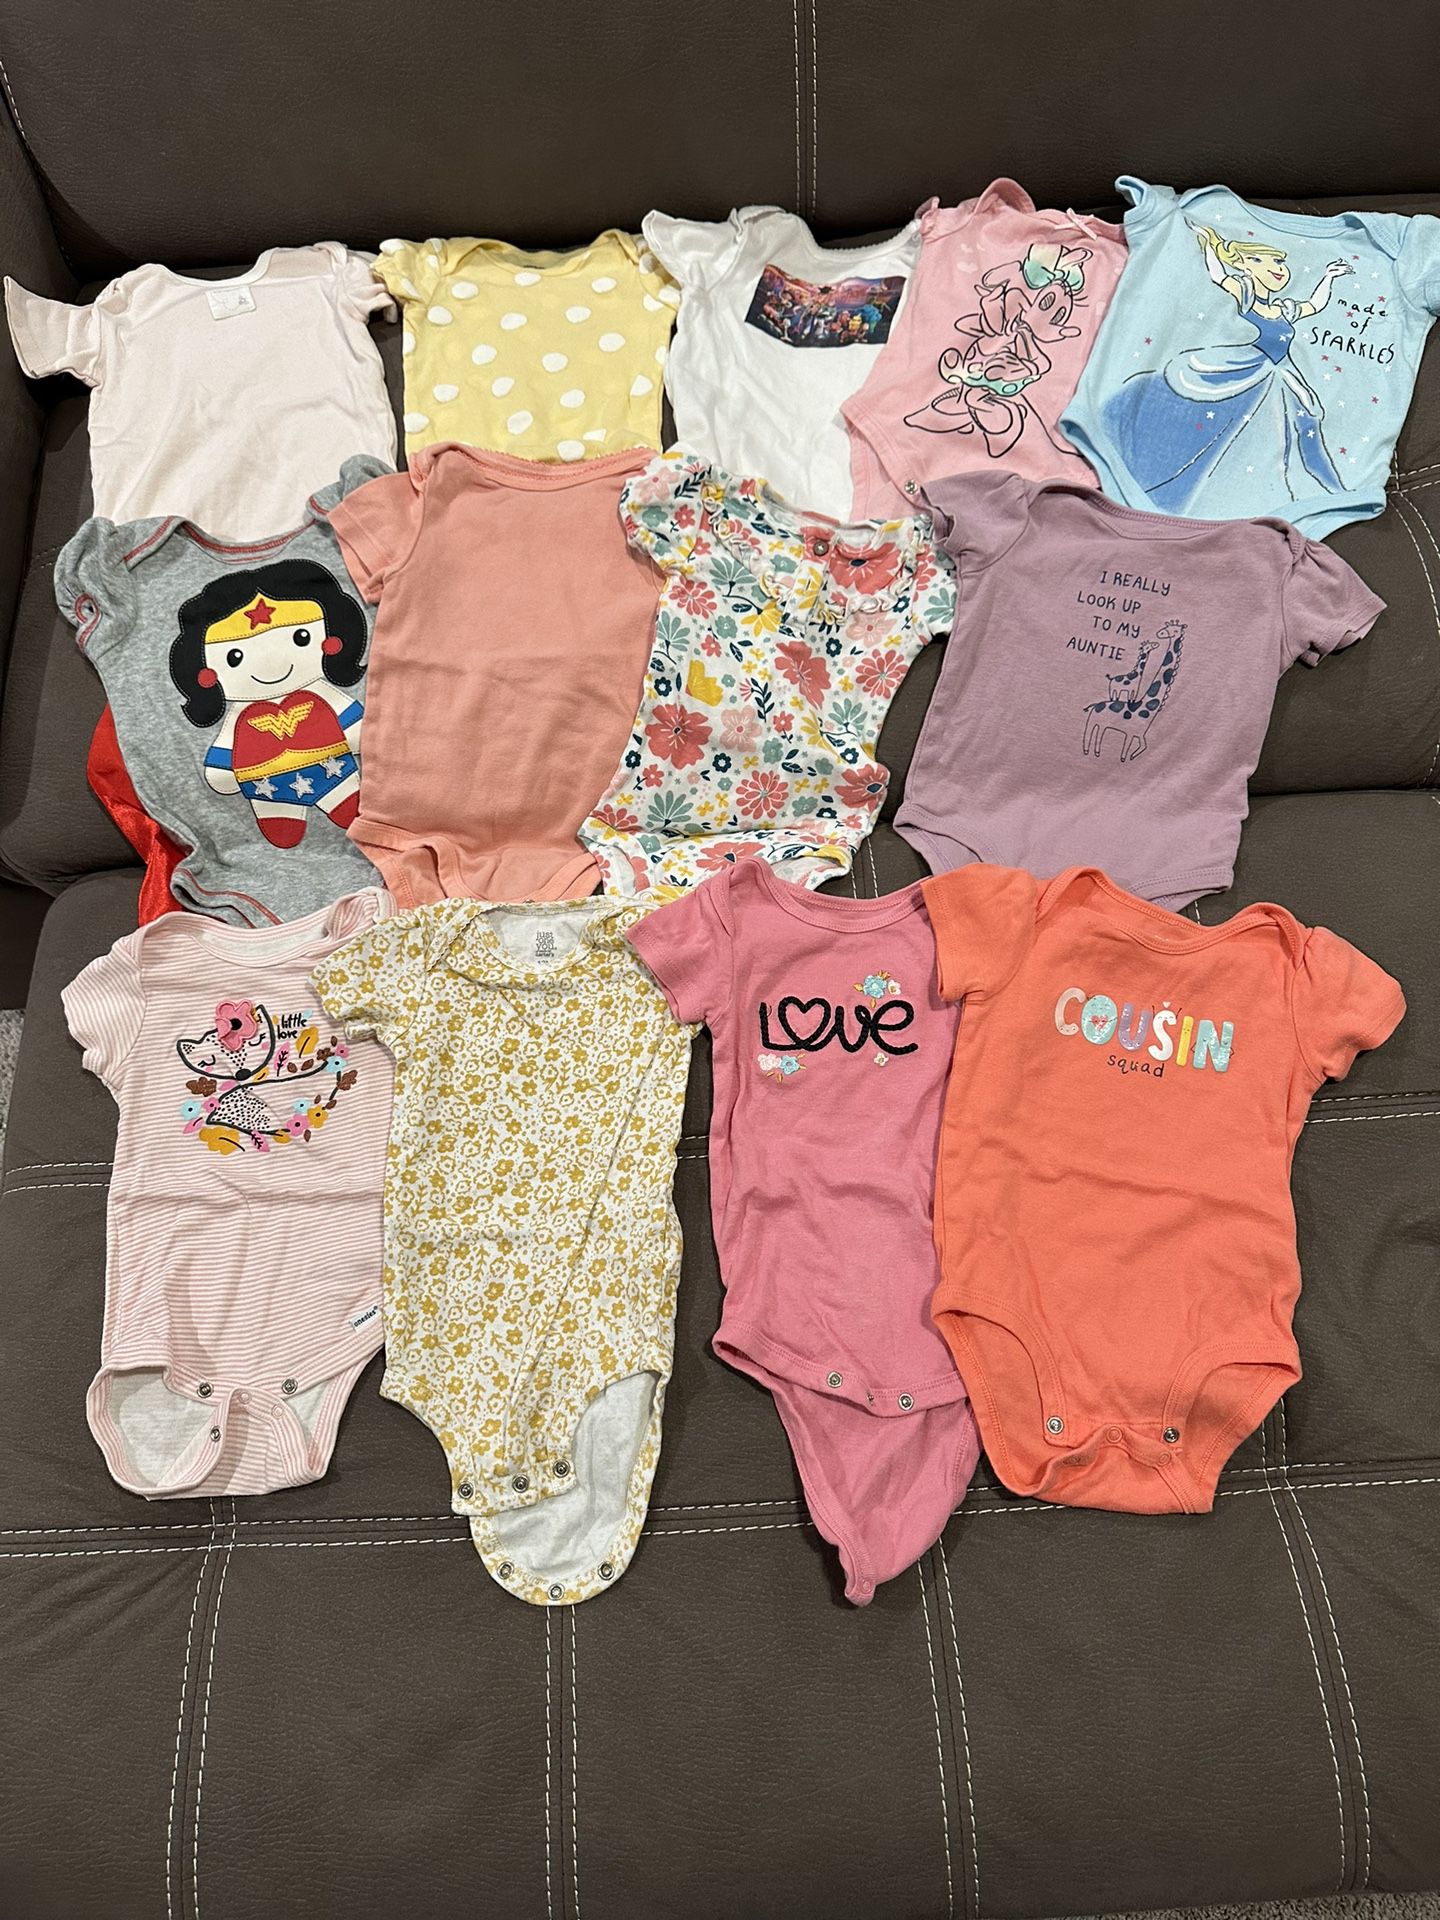 Baby Girls Clothes 12-24 Months 